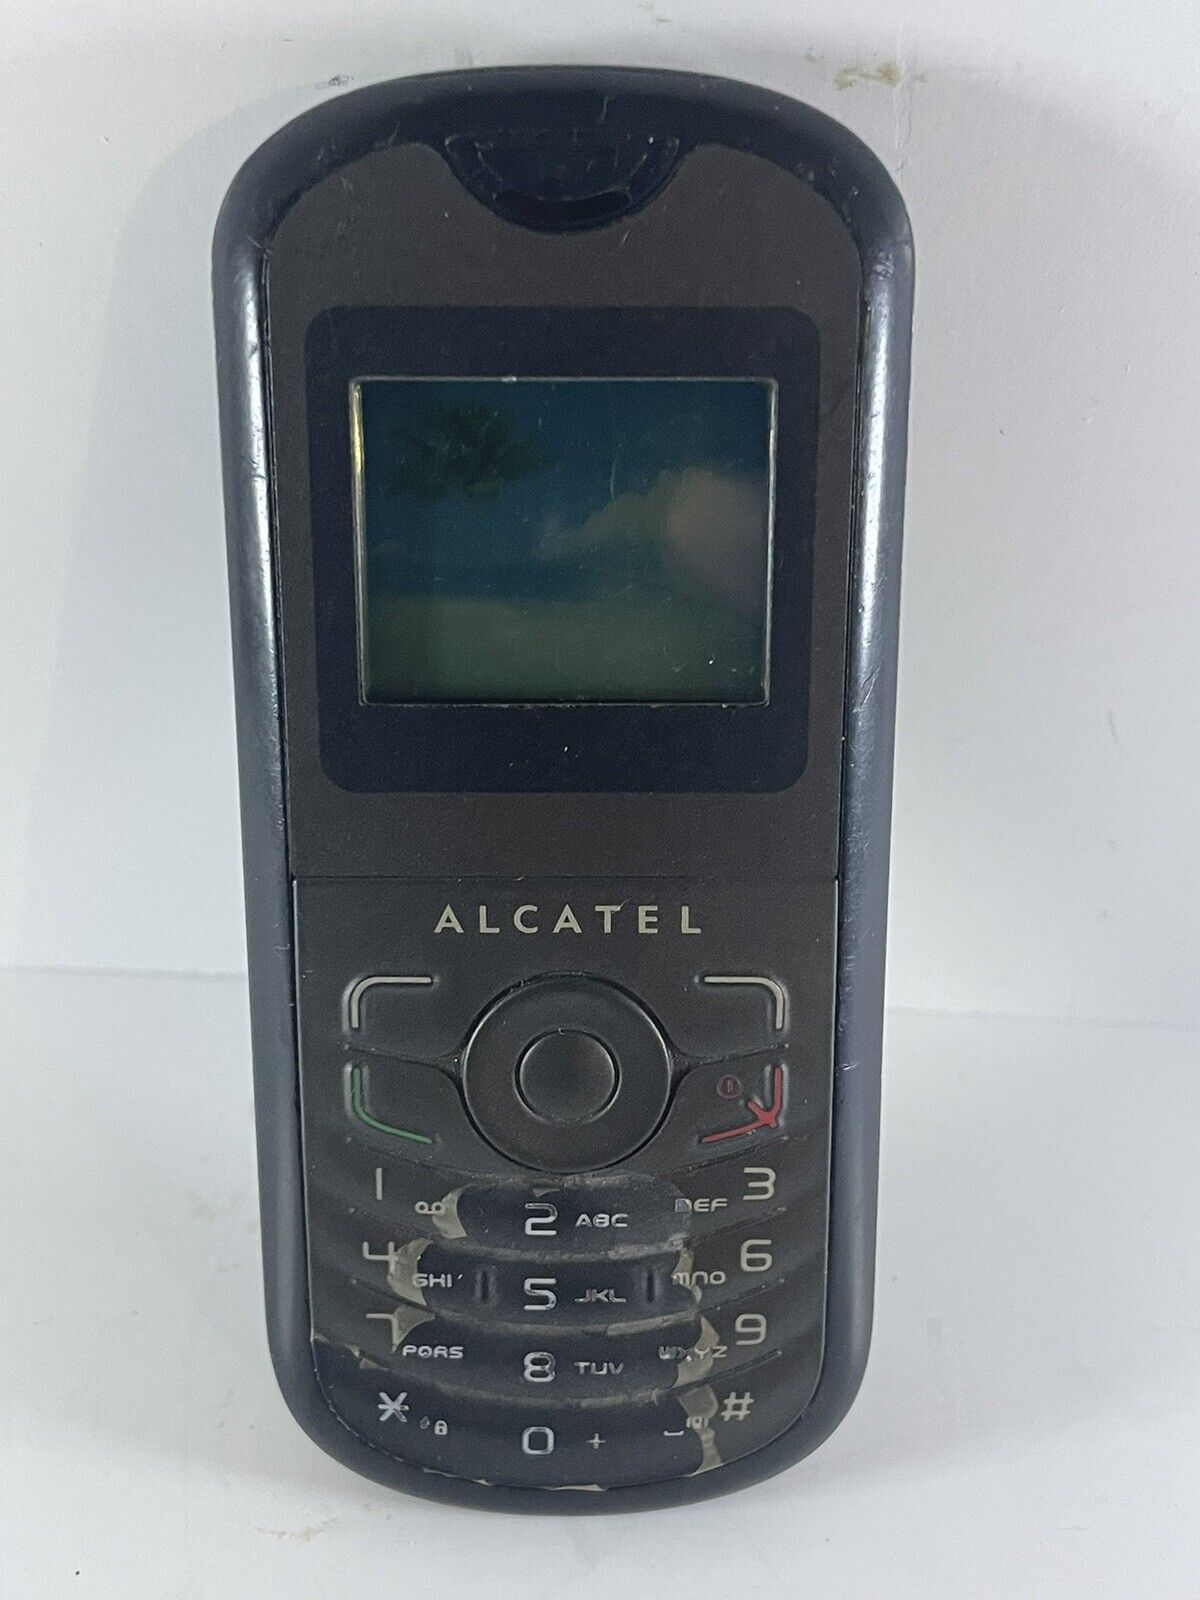 Alcatel Cell Phone Black Vintage Classic 2G Mobile Phone Untested- Parts